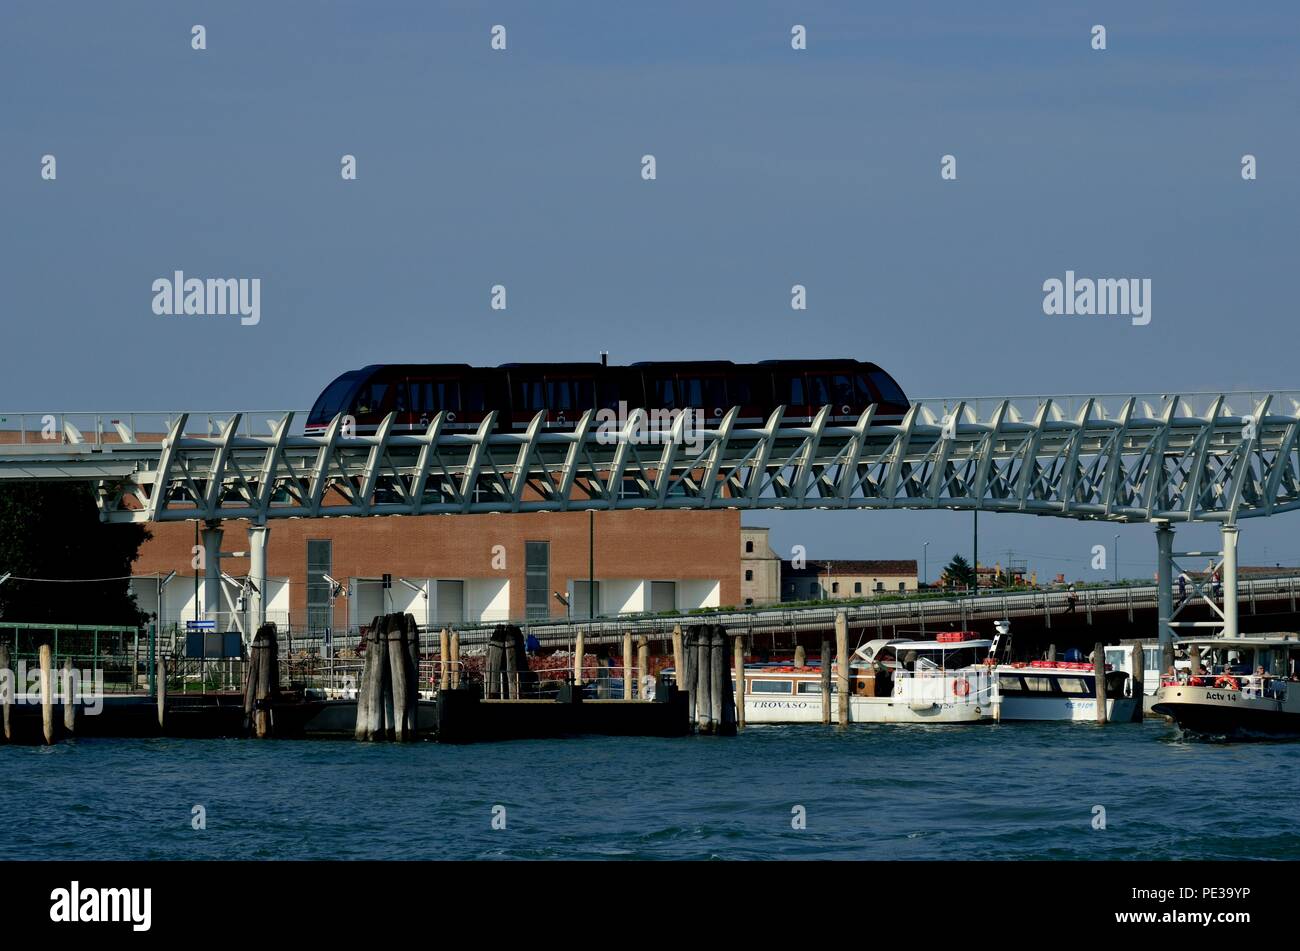 The People Mover is a small-scale automated guide way public transit system which connects the Piazzale Roma and other terminals, Venice,  Italy, Stock Photo